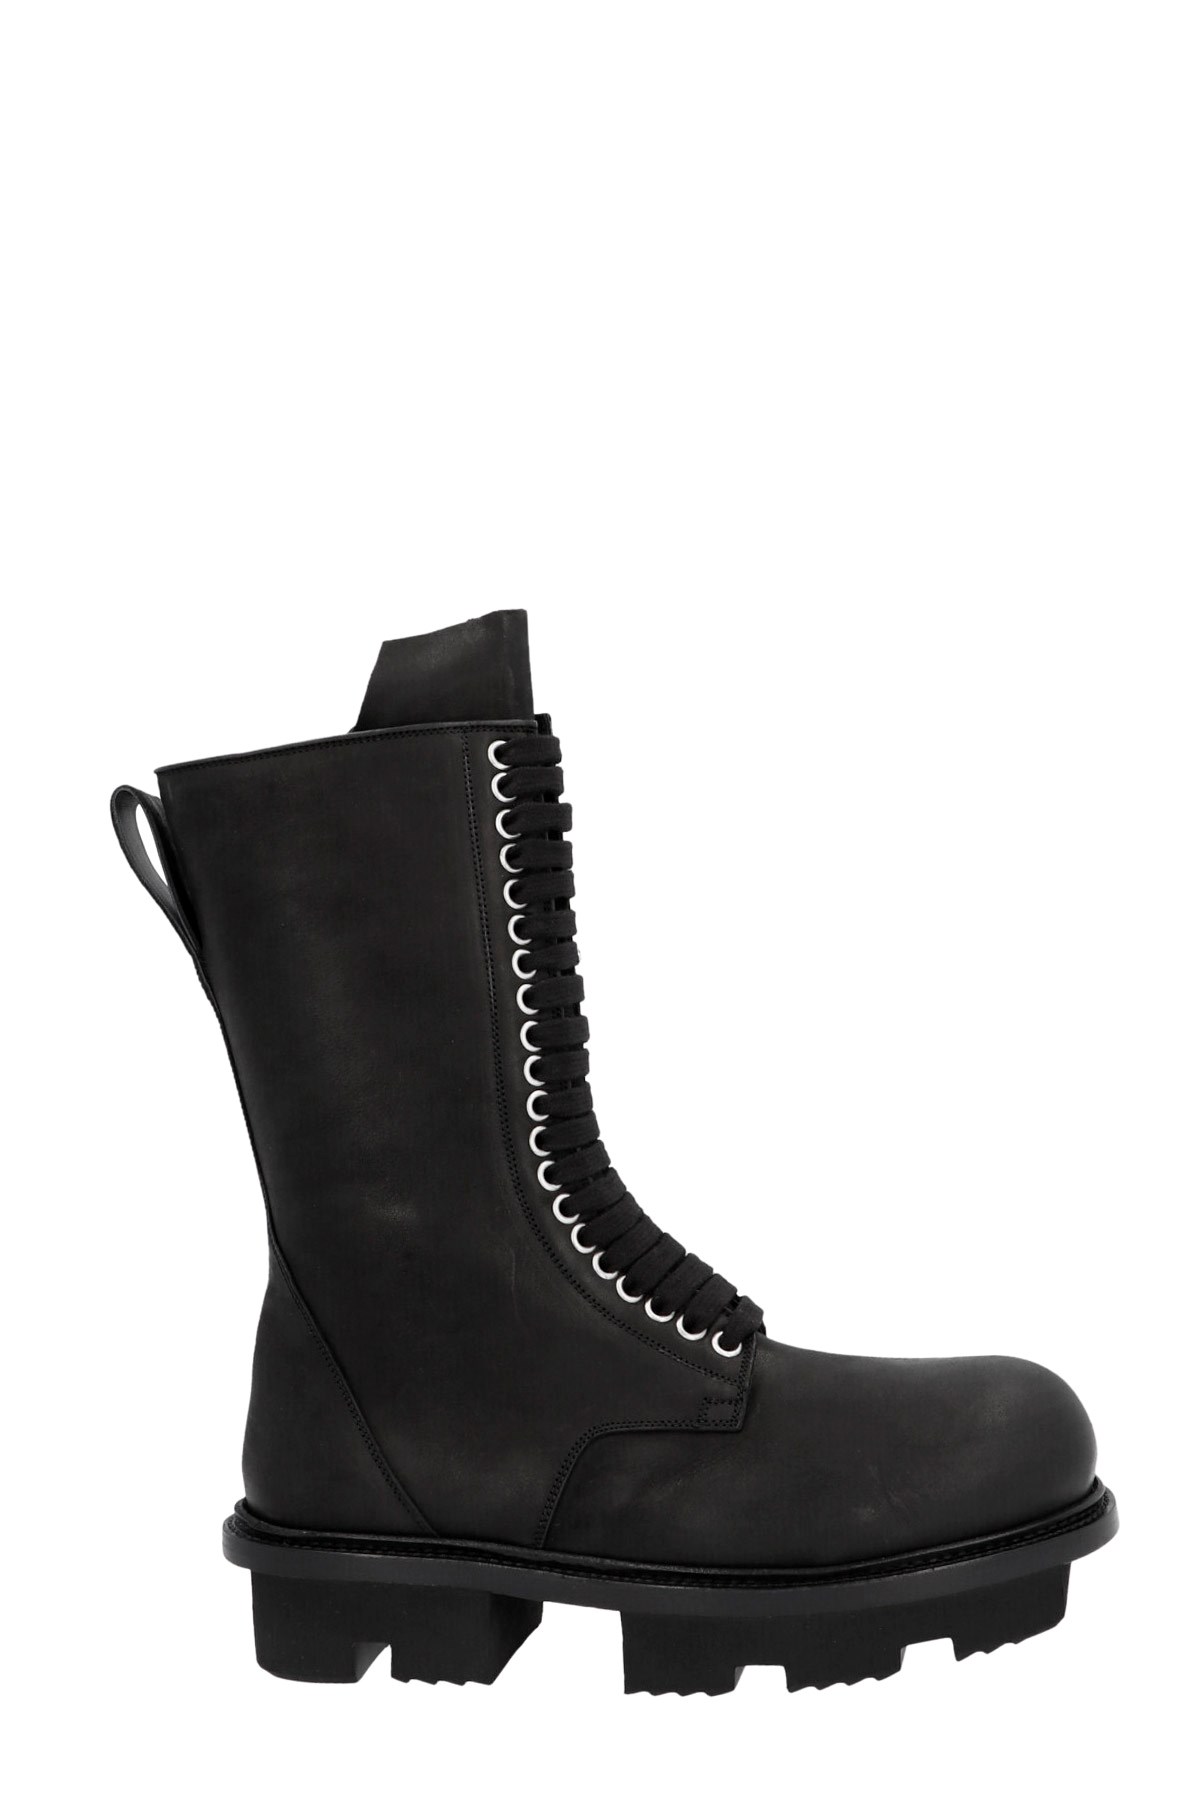 RICK OWENS 'Army Bozo Megatooth' Combat Boots